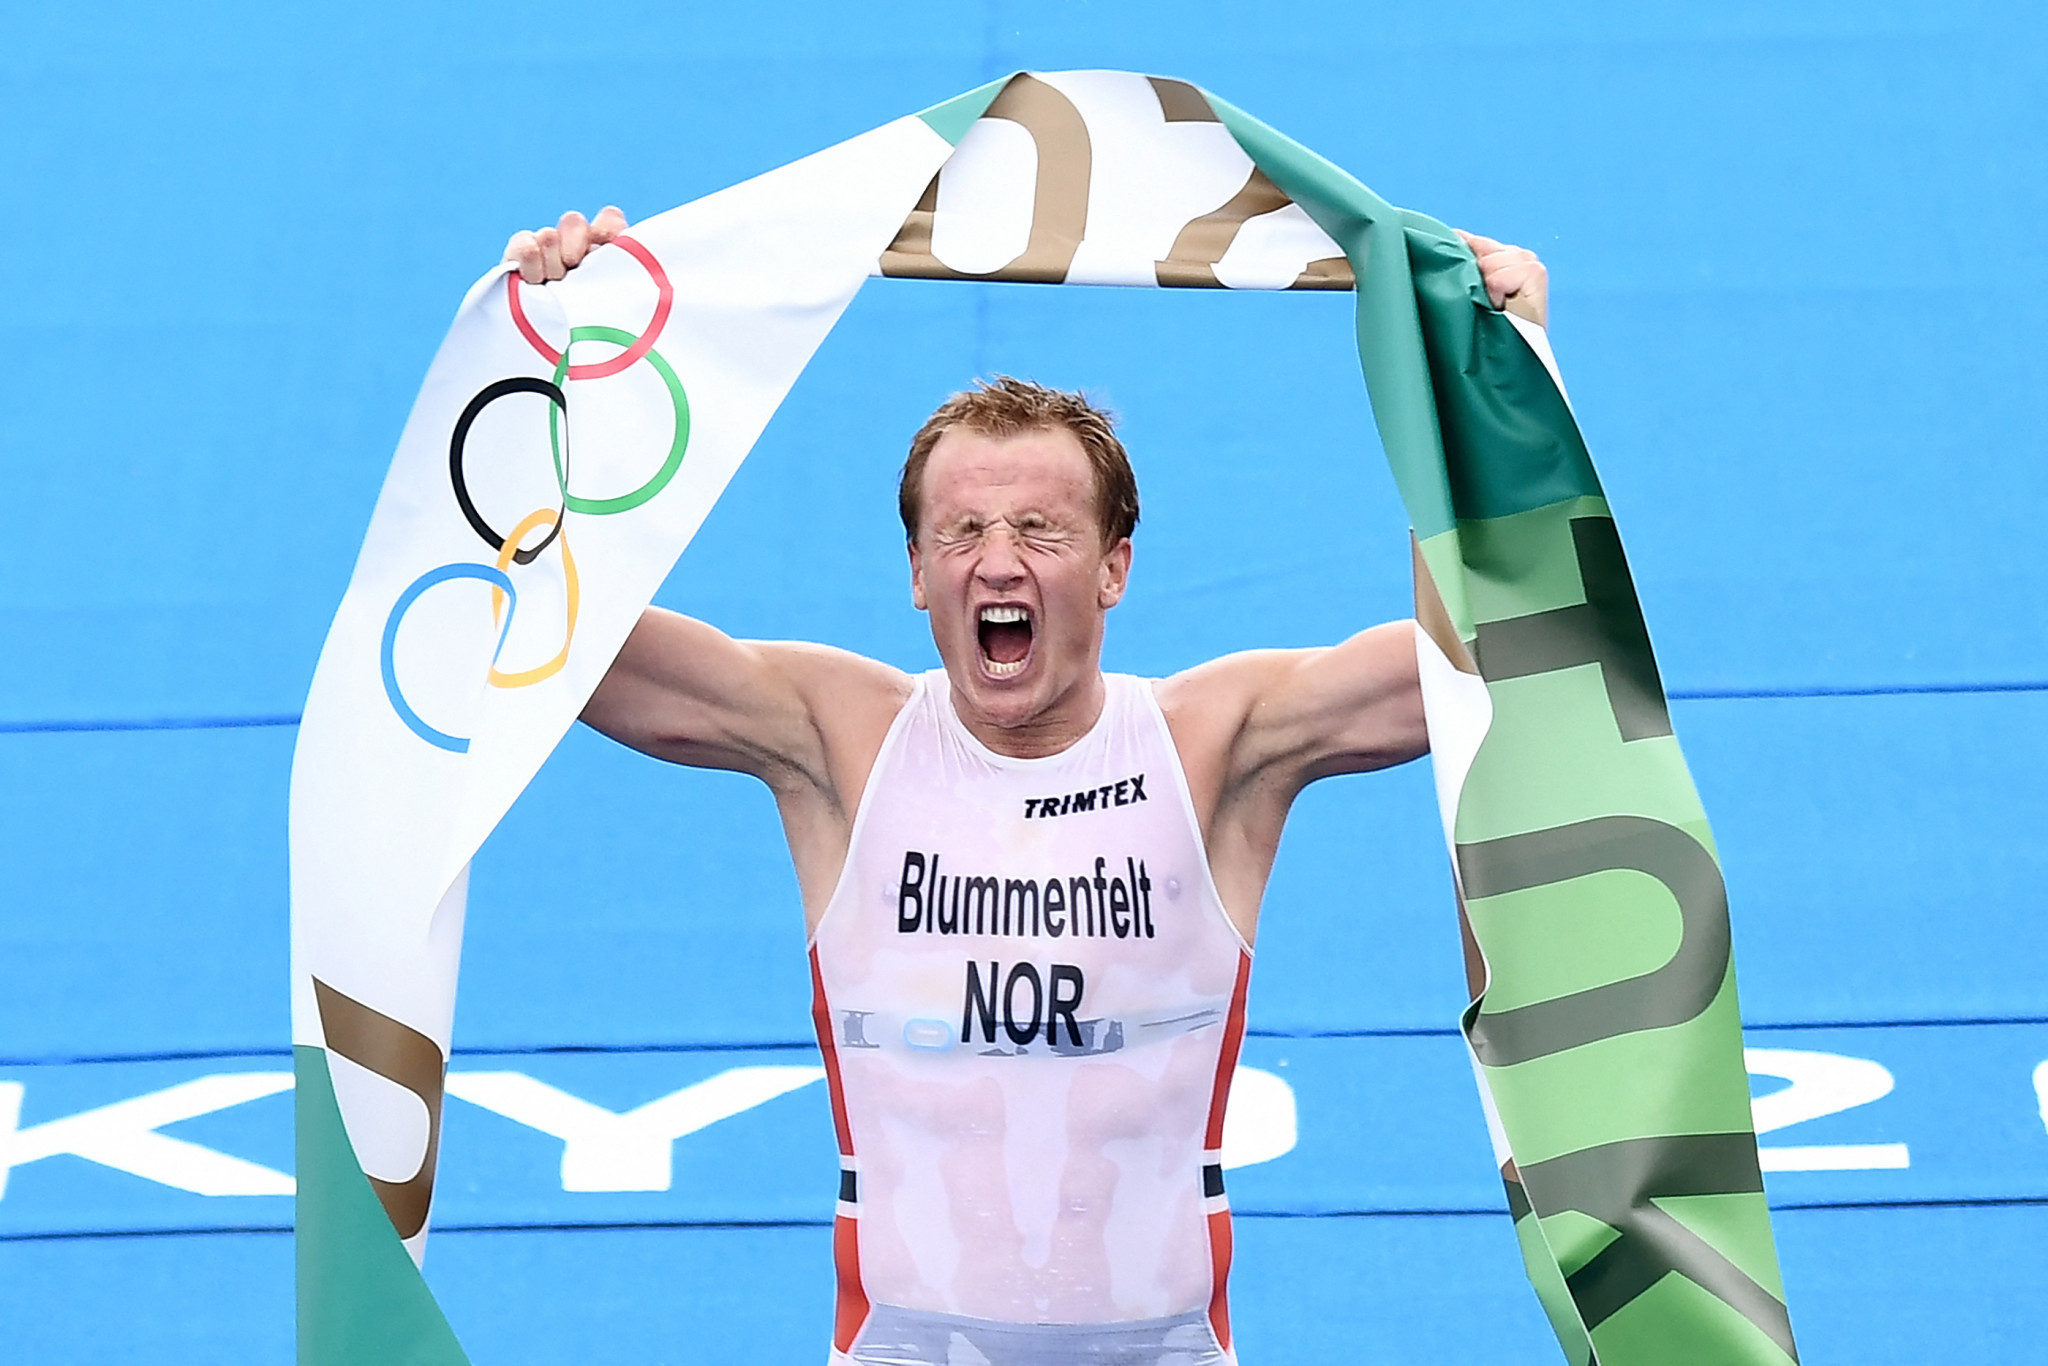 Norway claimed to be most successful Olympic nation per capita